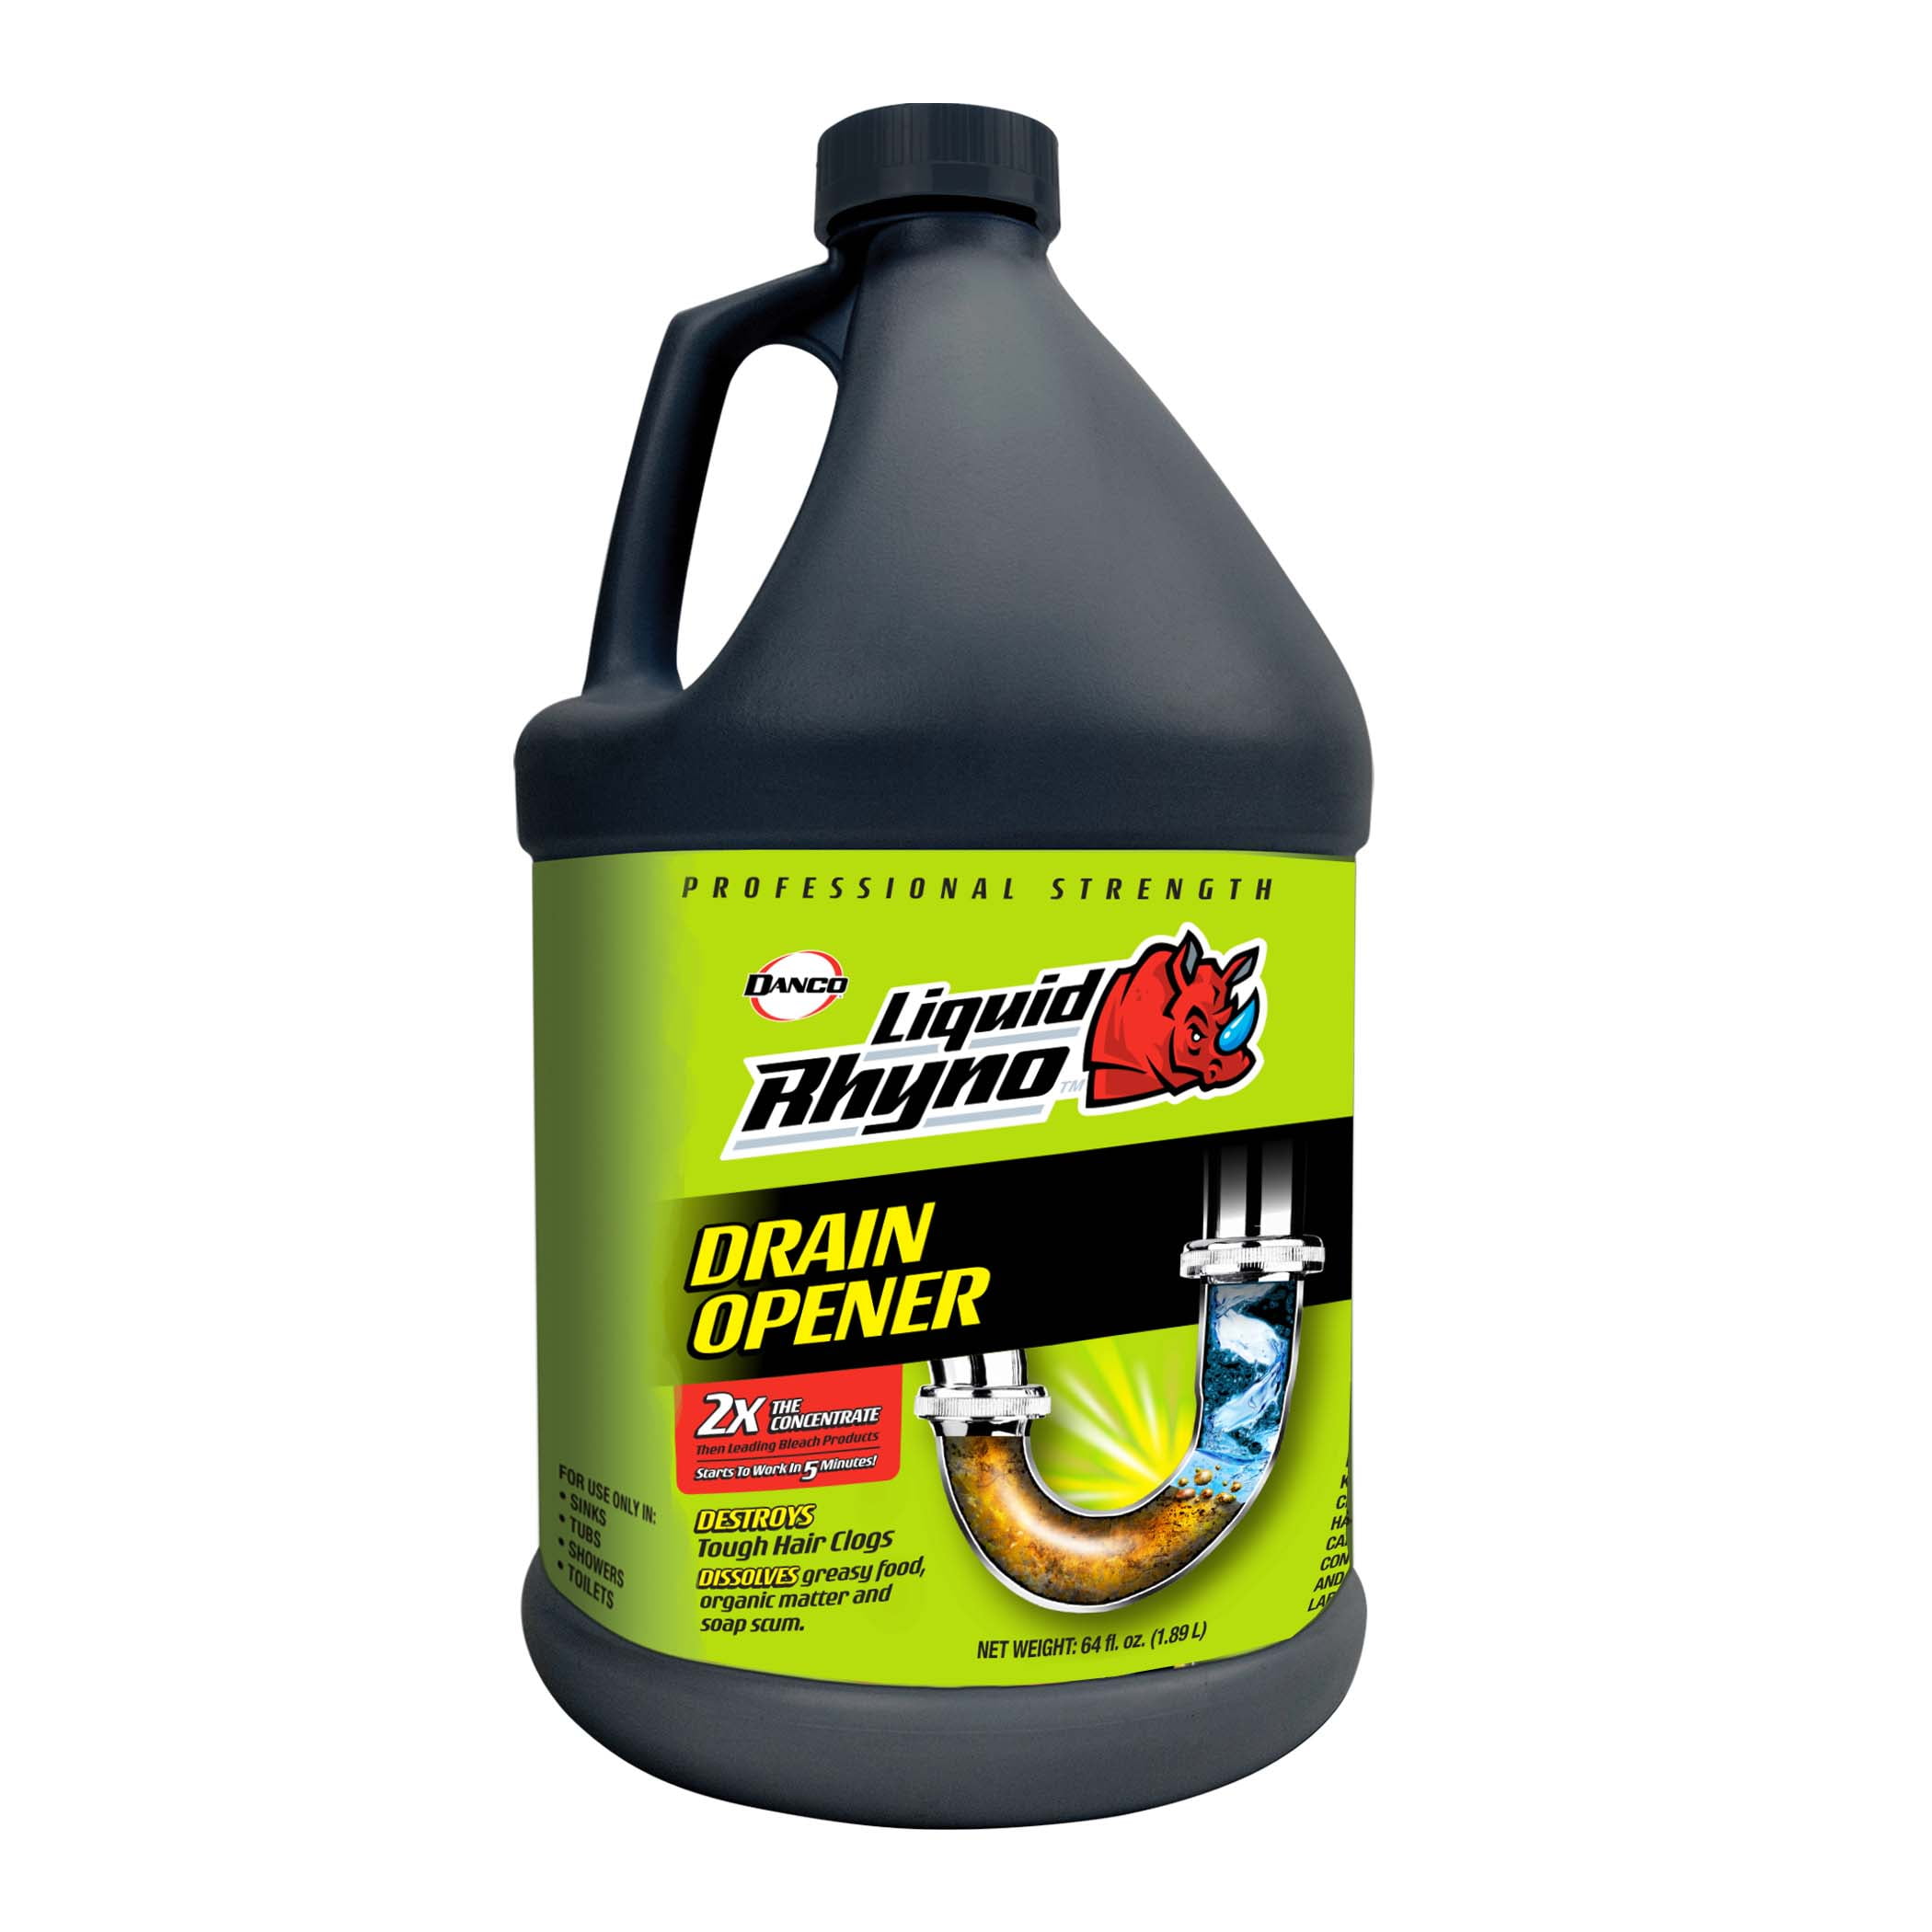 Instant Power 67.6 oz. Hair and Grease Drain Openers & Chemicals